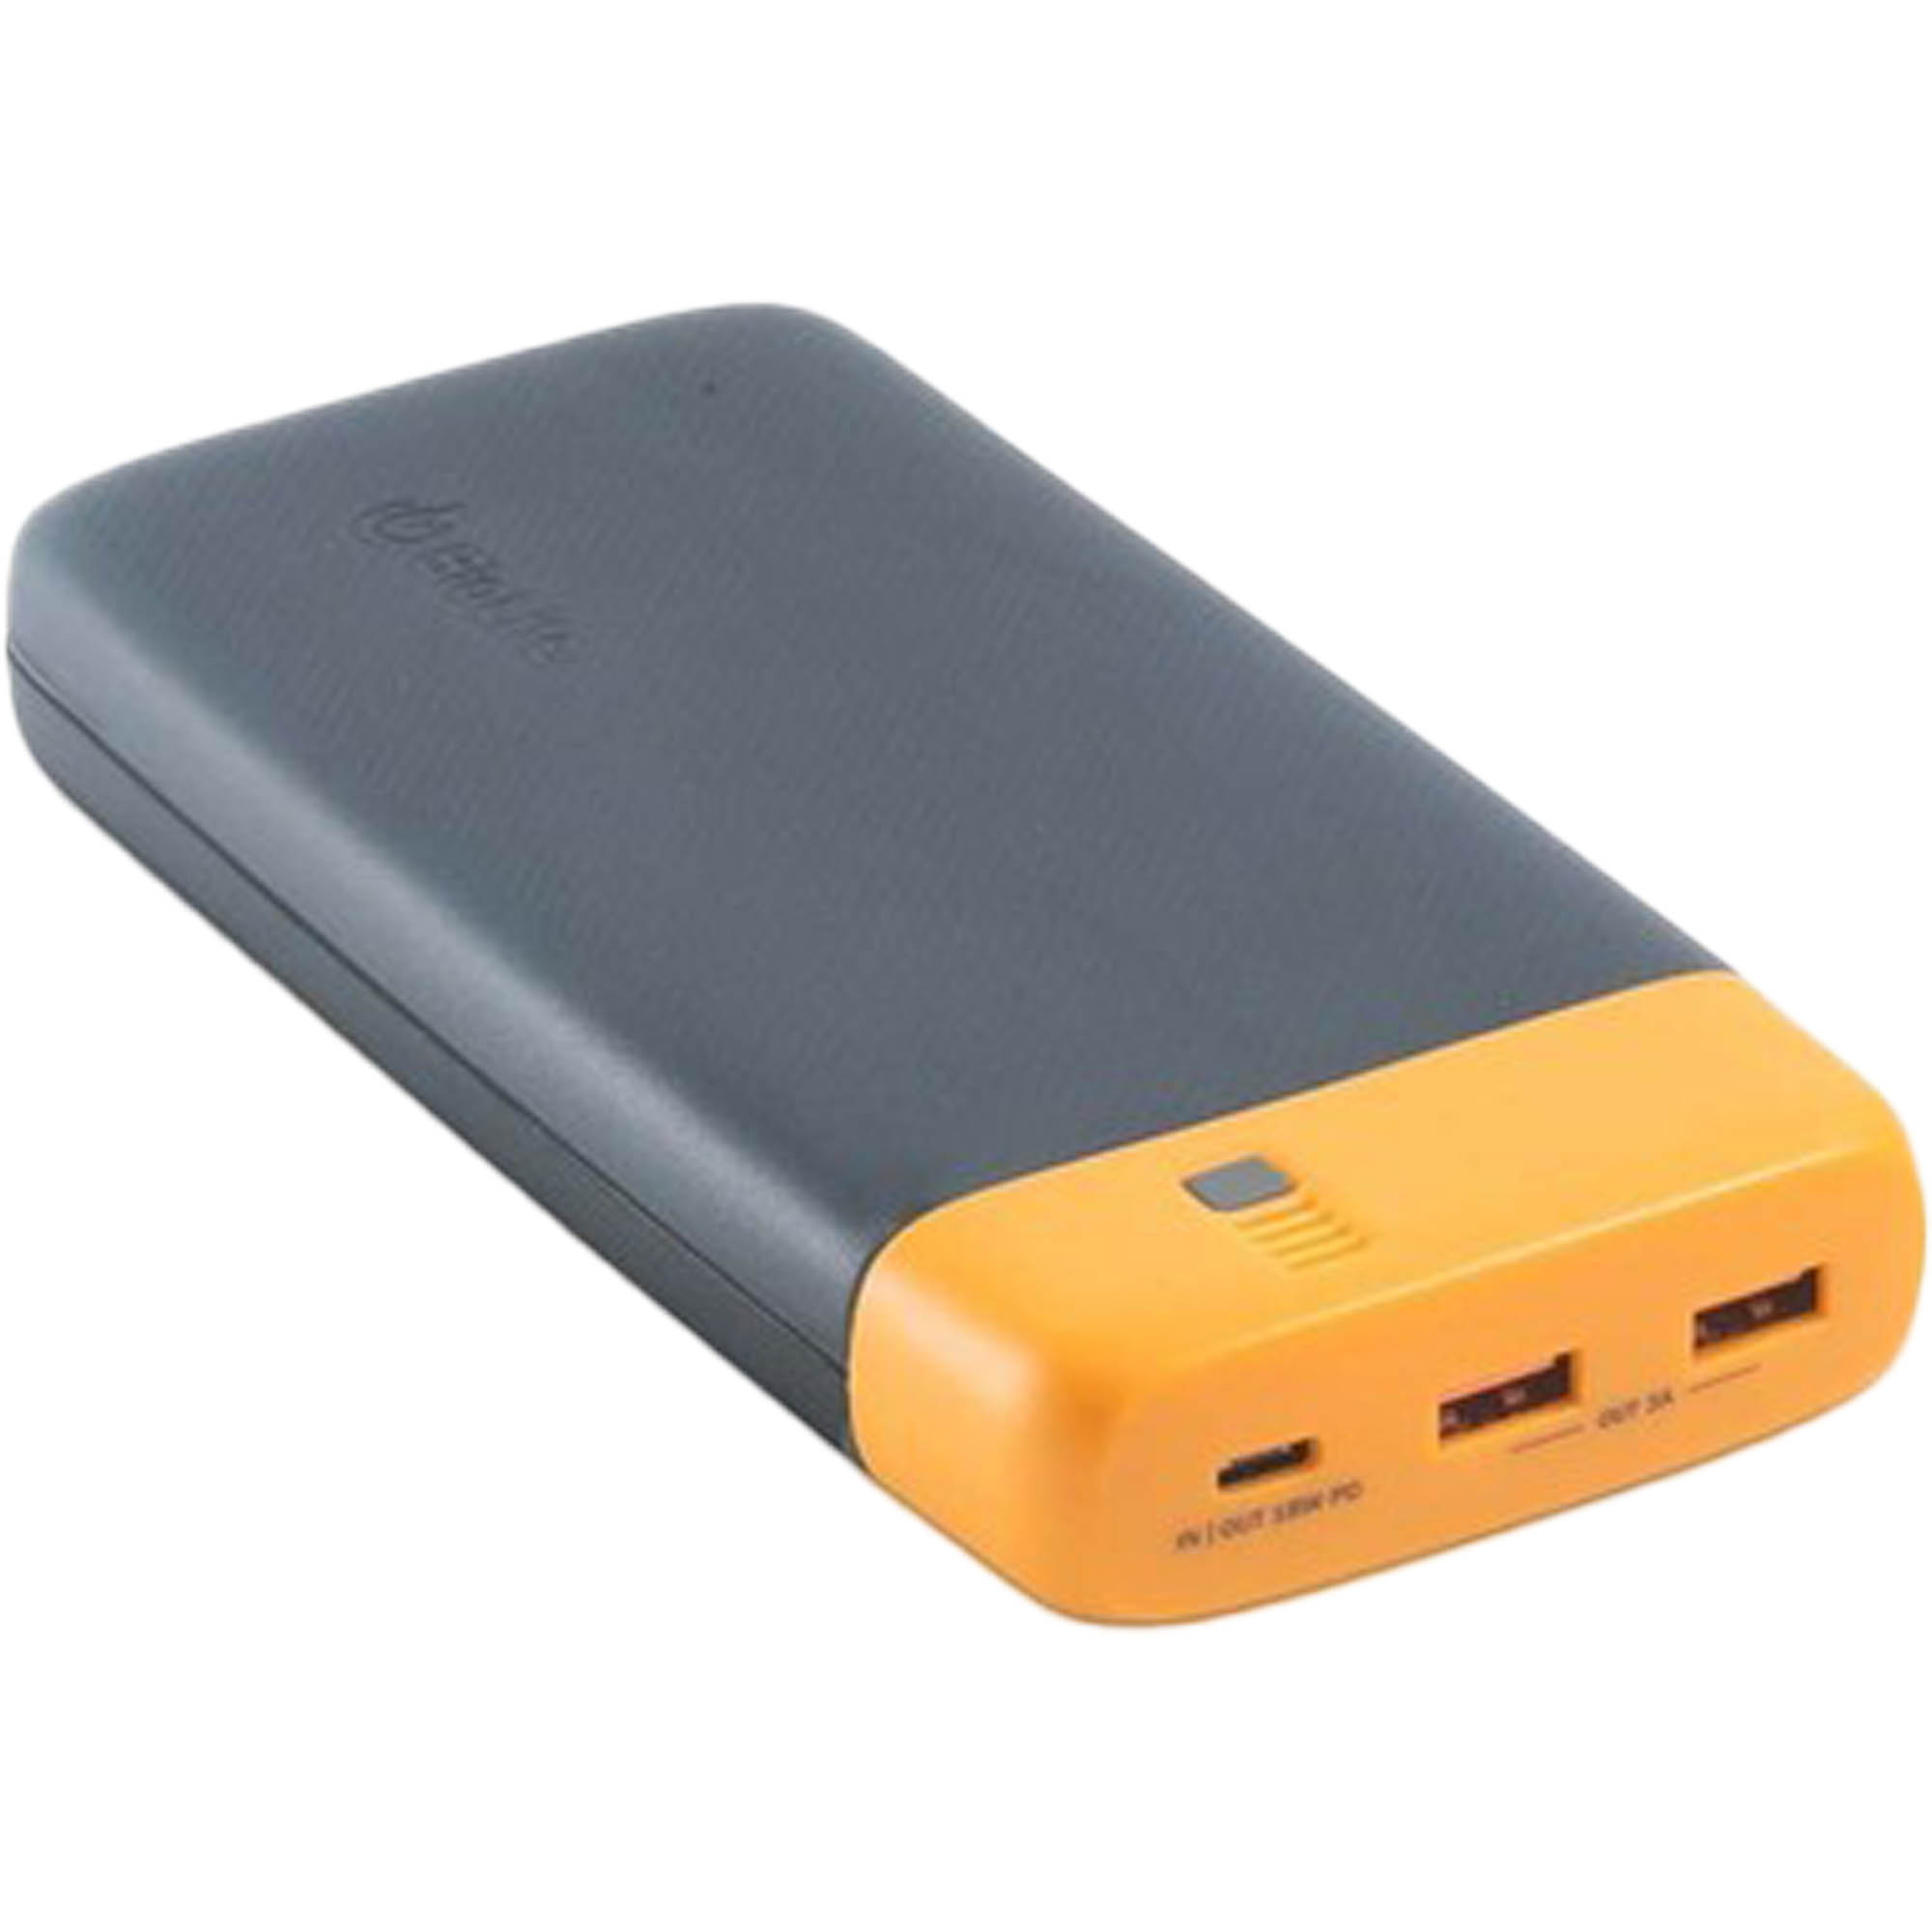 Photos - Power Bank BioLite Charge 80 PD USB Device Charger & Power Pack, OS Grey CBC0100 